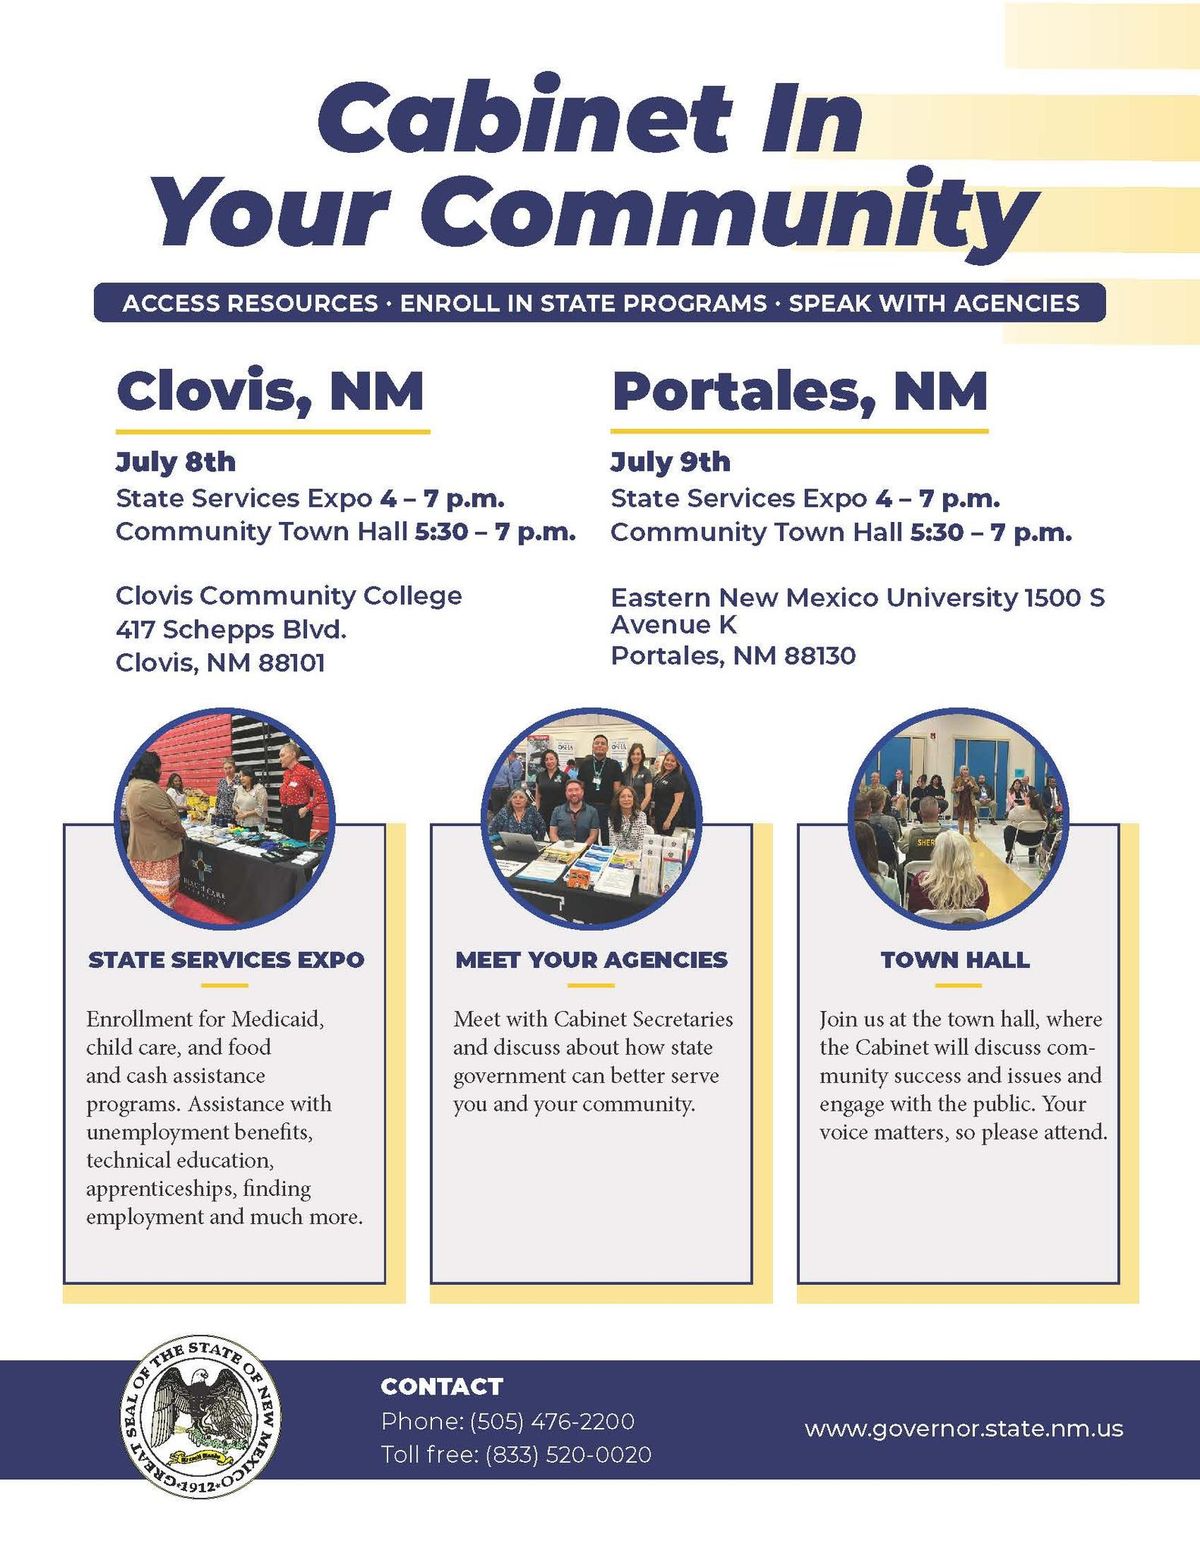 NM WCA at Clovis Community College and Eastern New Mexico University